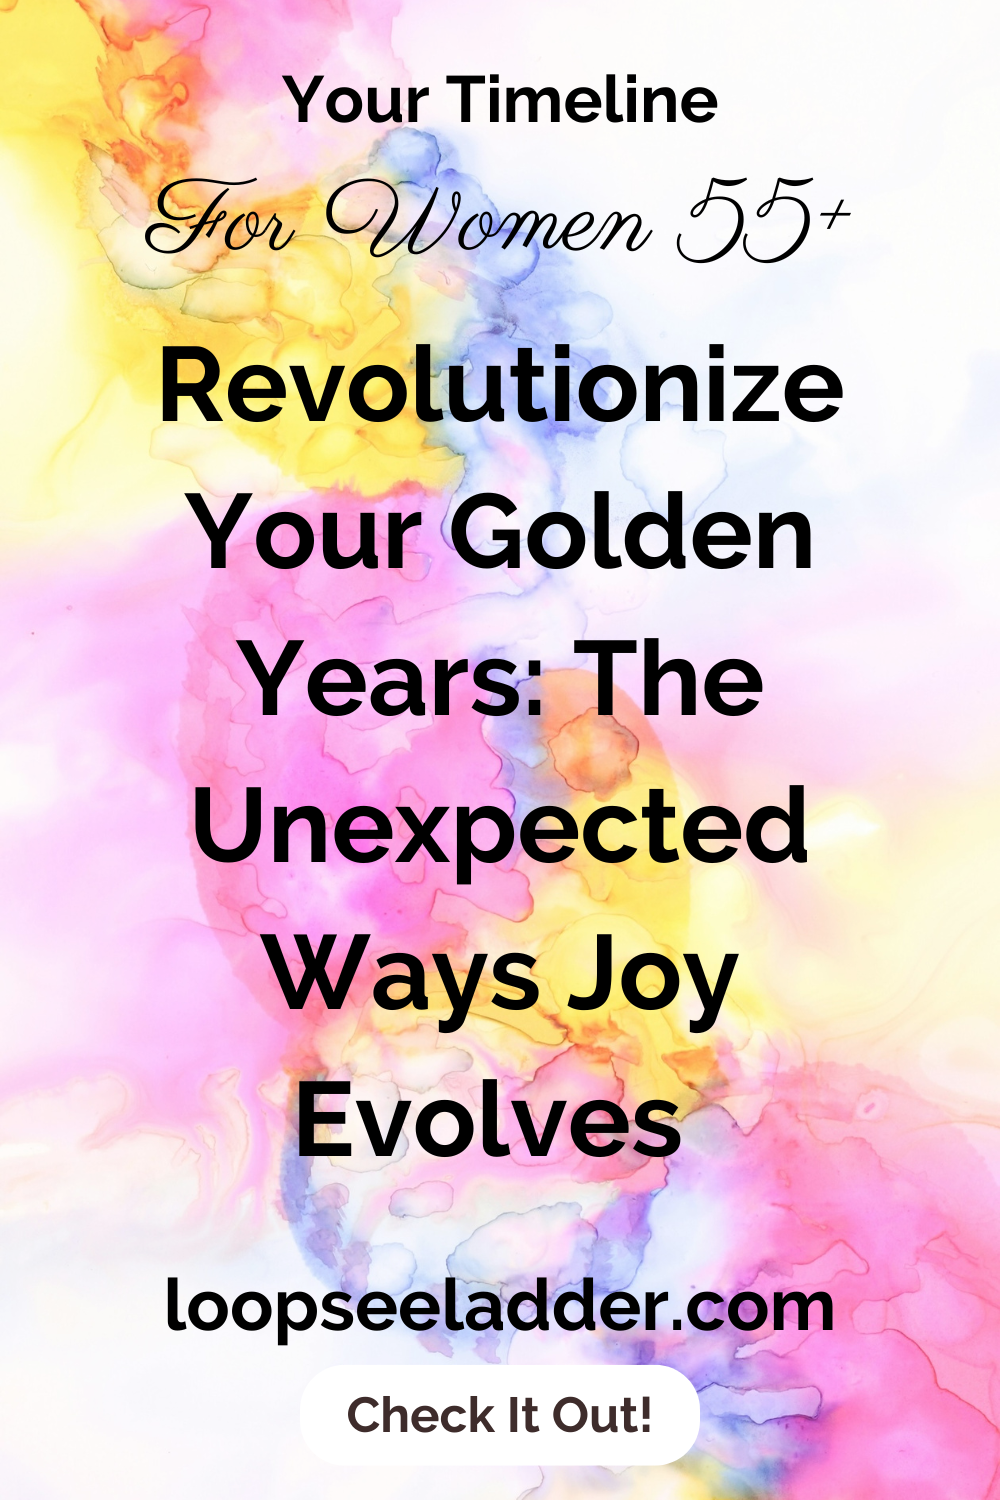 The Unexpected Ways Joy Evolves for Women Over 55